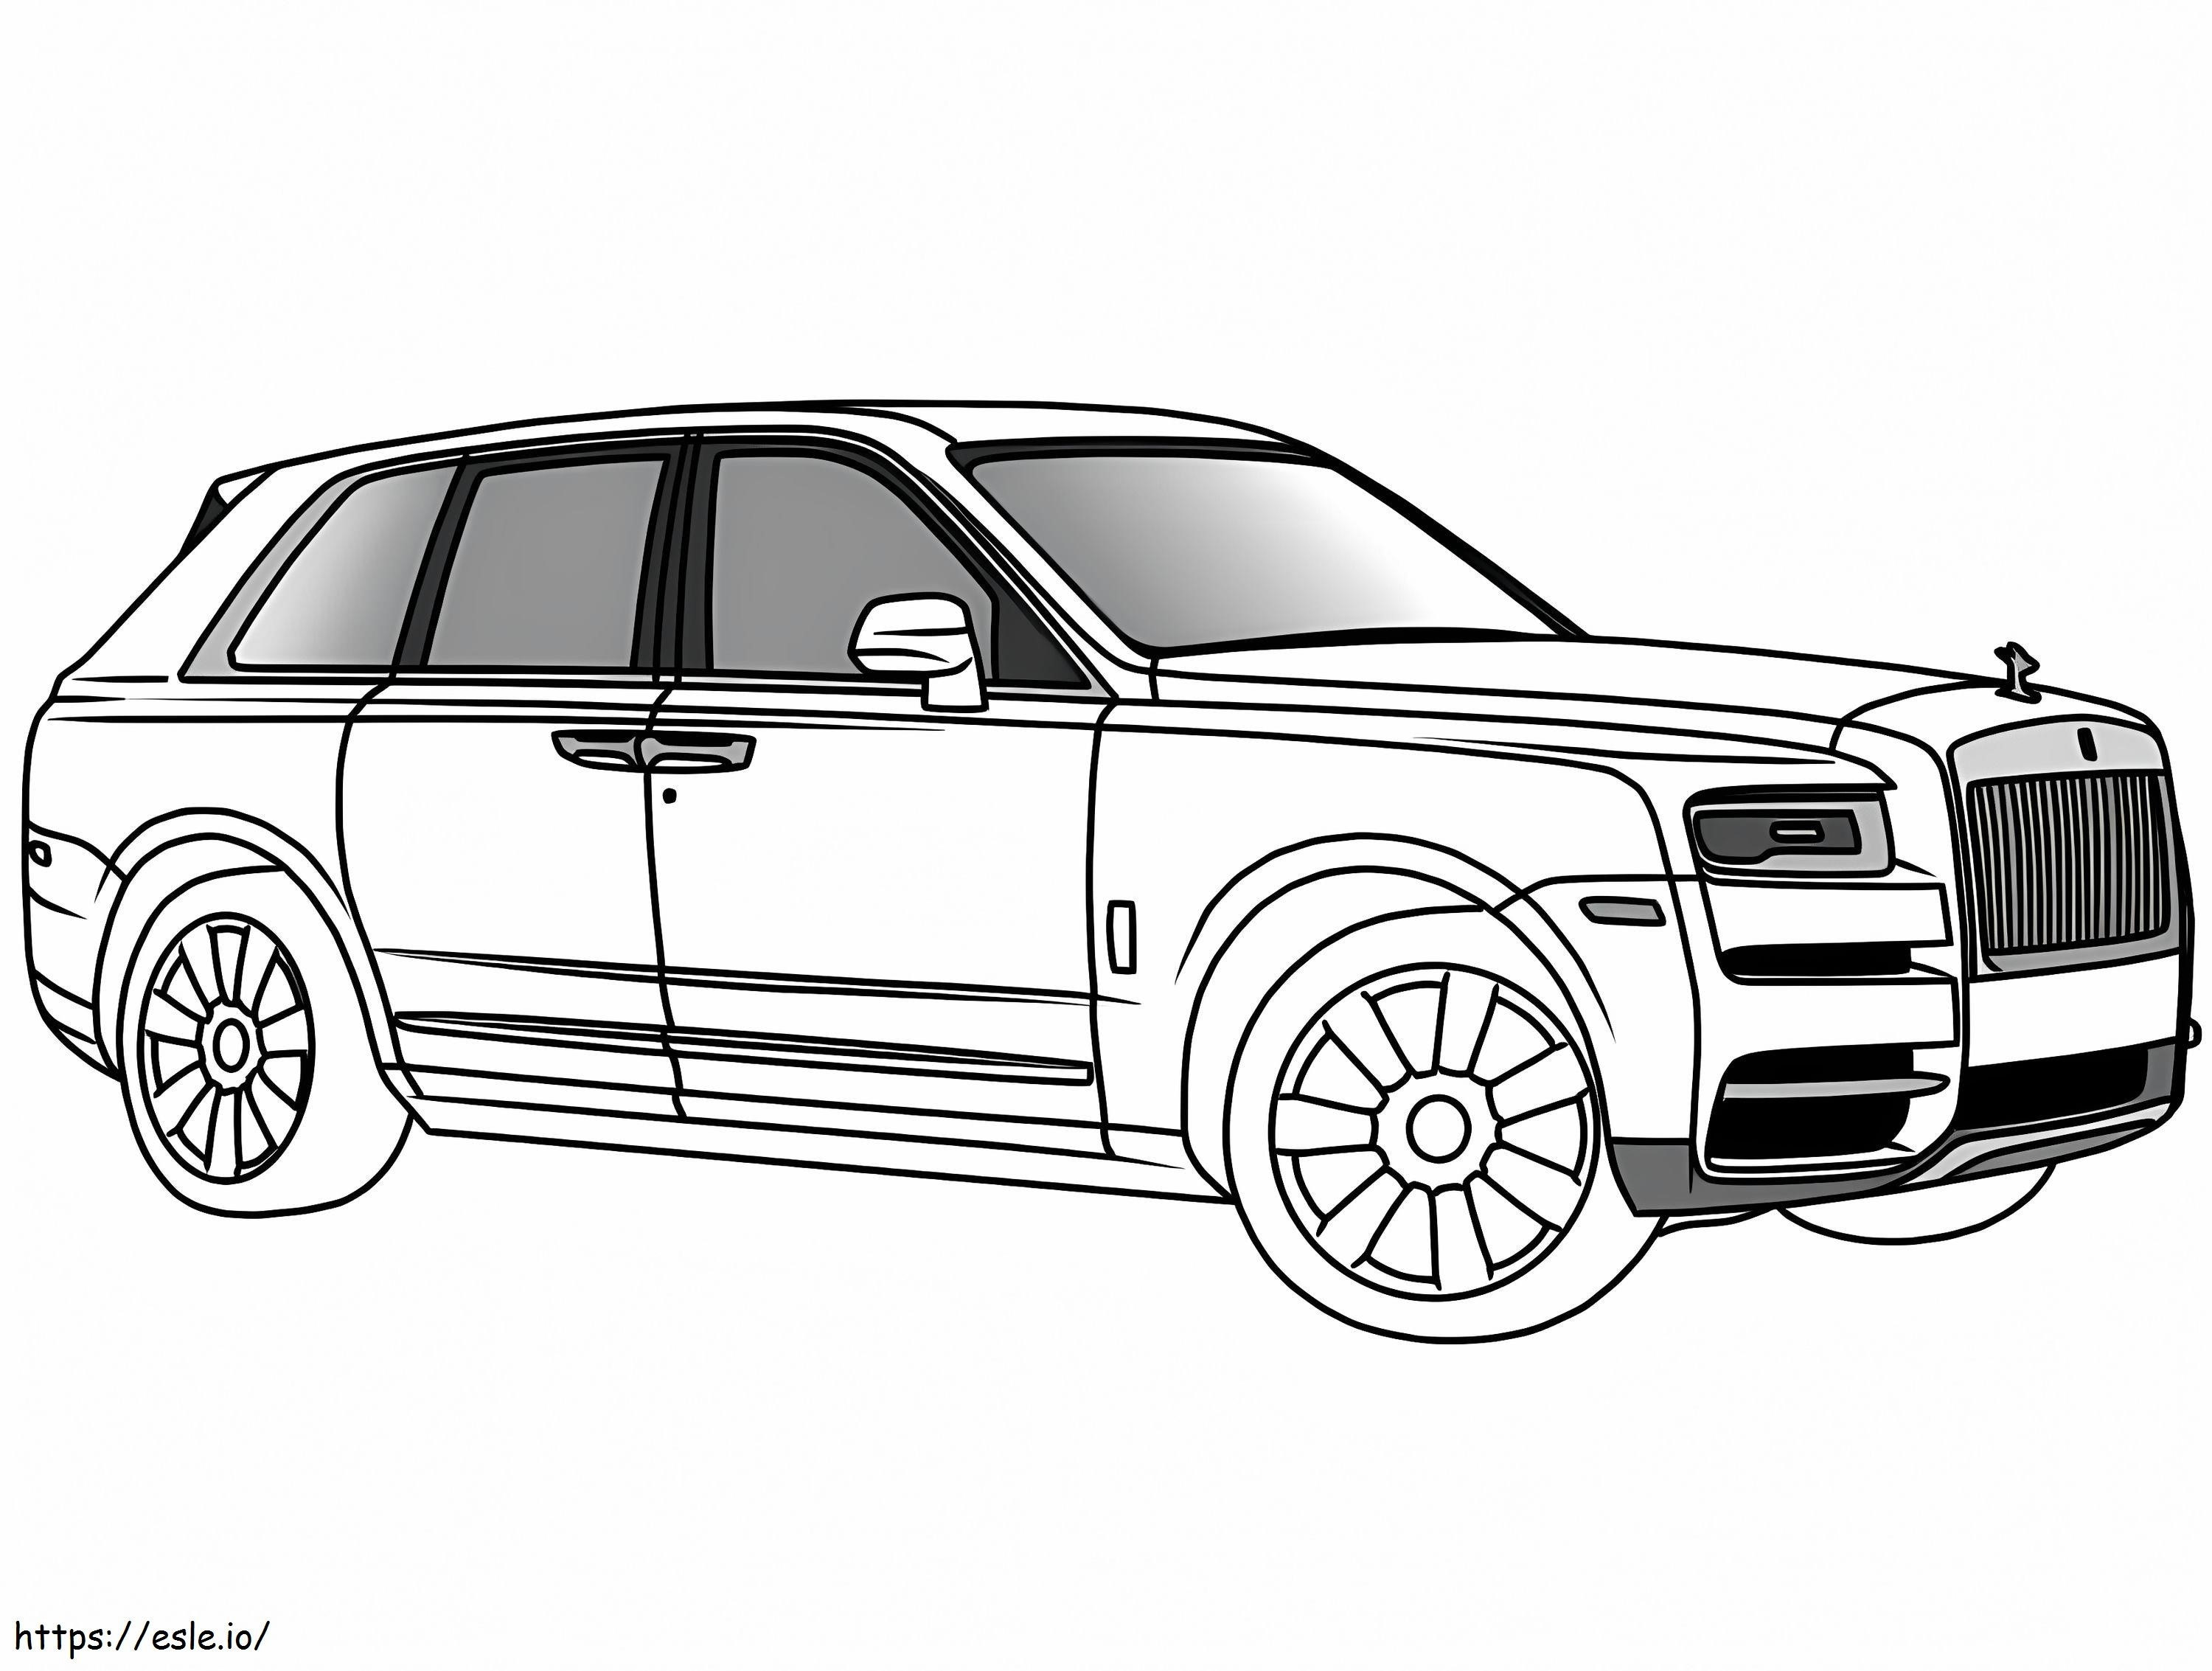 Rolls Royce Cullinan coloring page